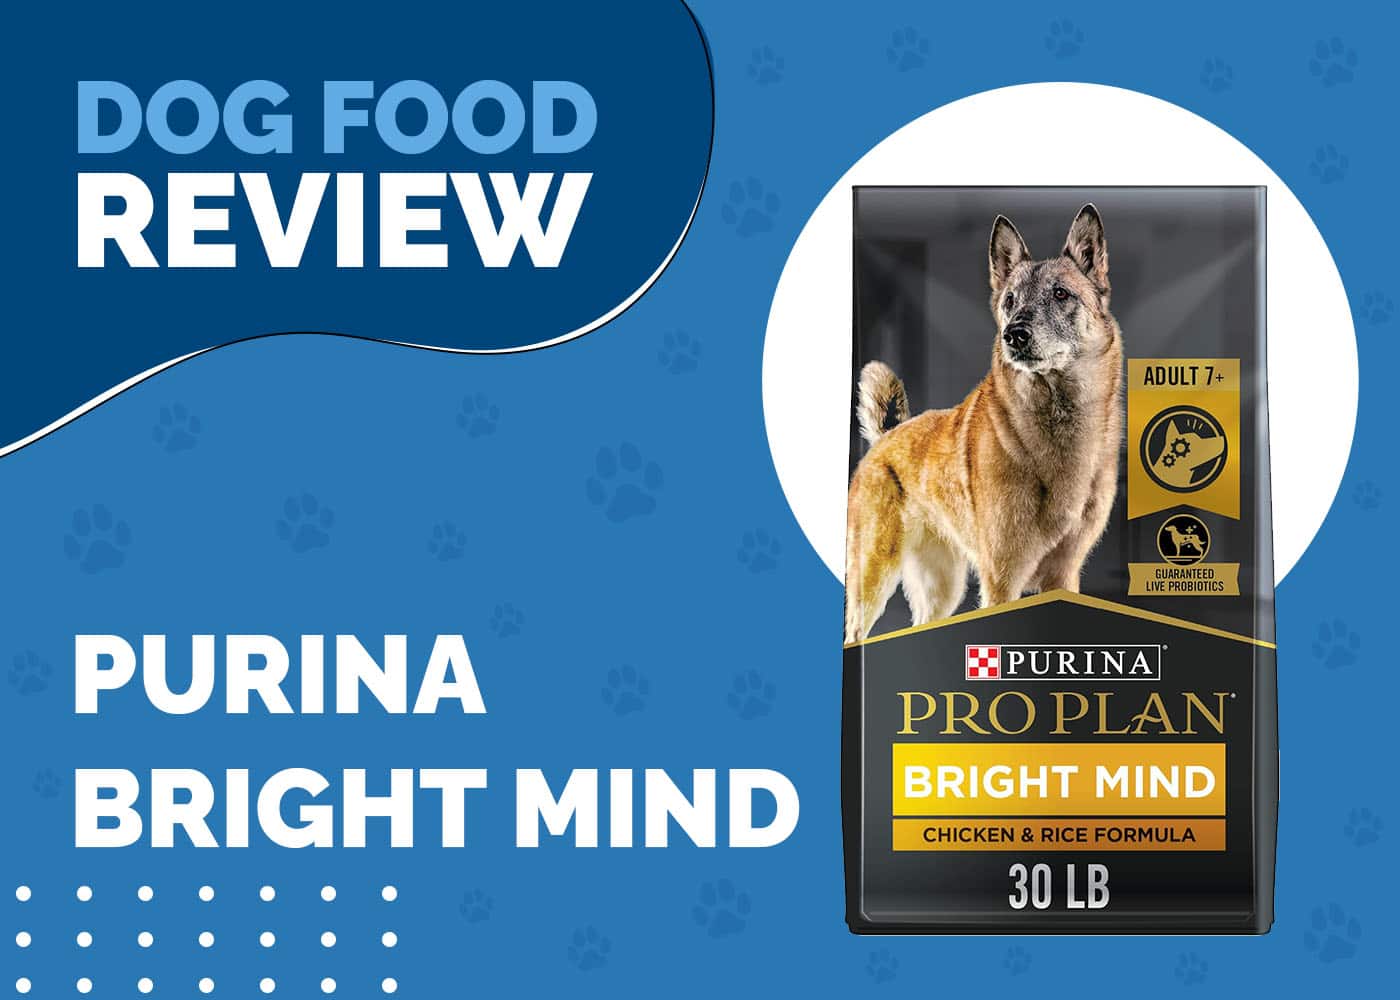 Purina Bright Mind Dog Food Review